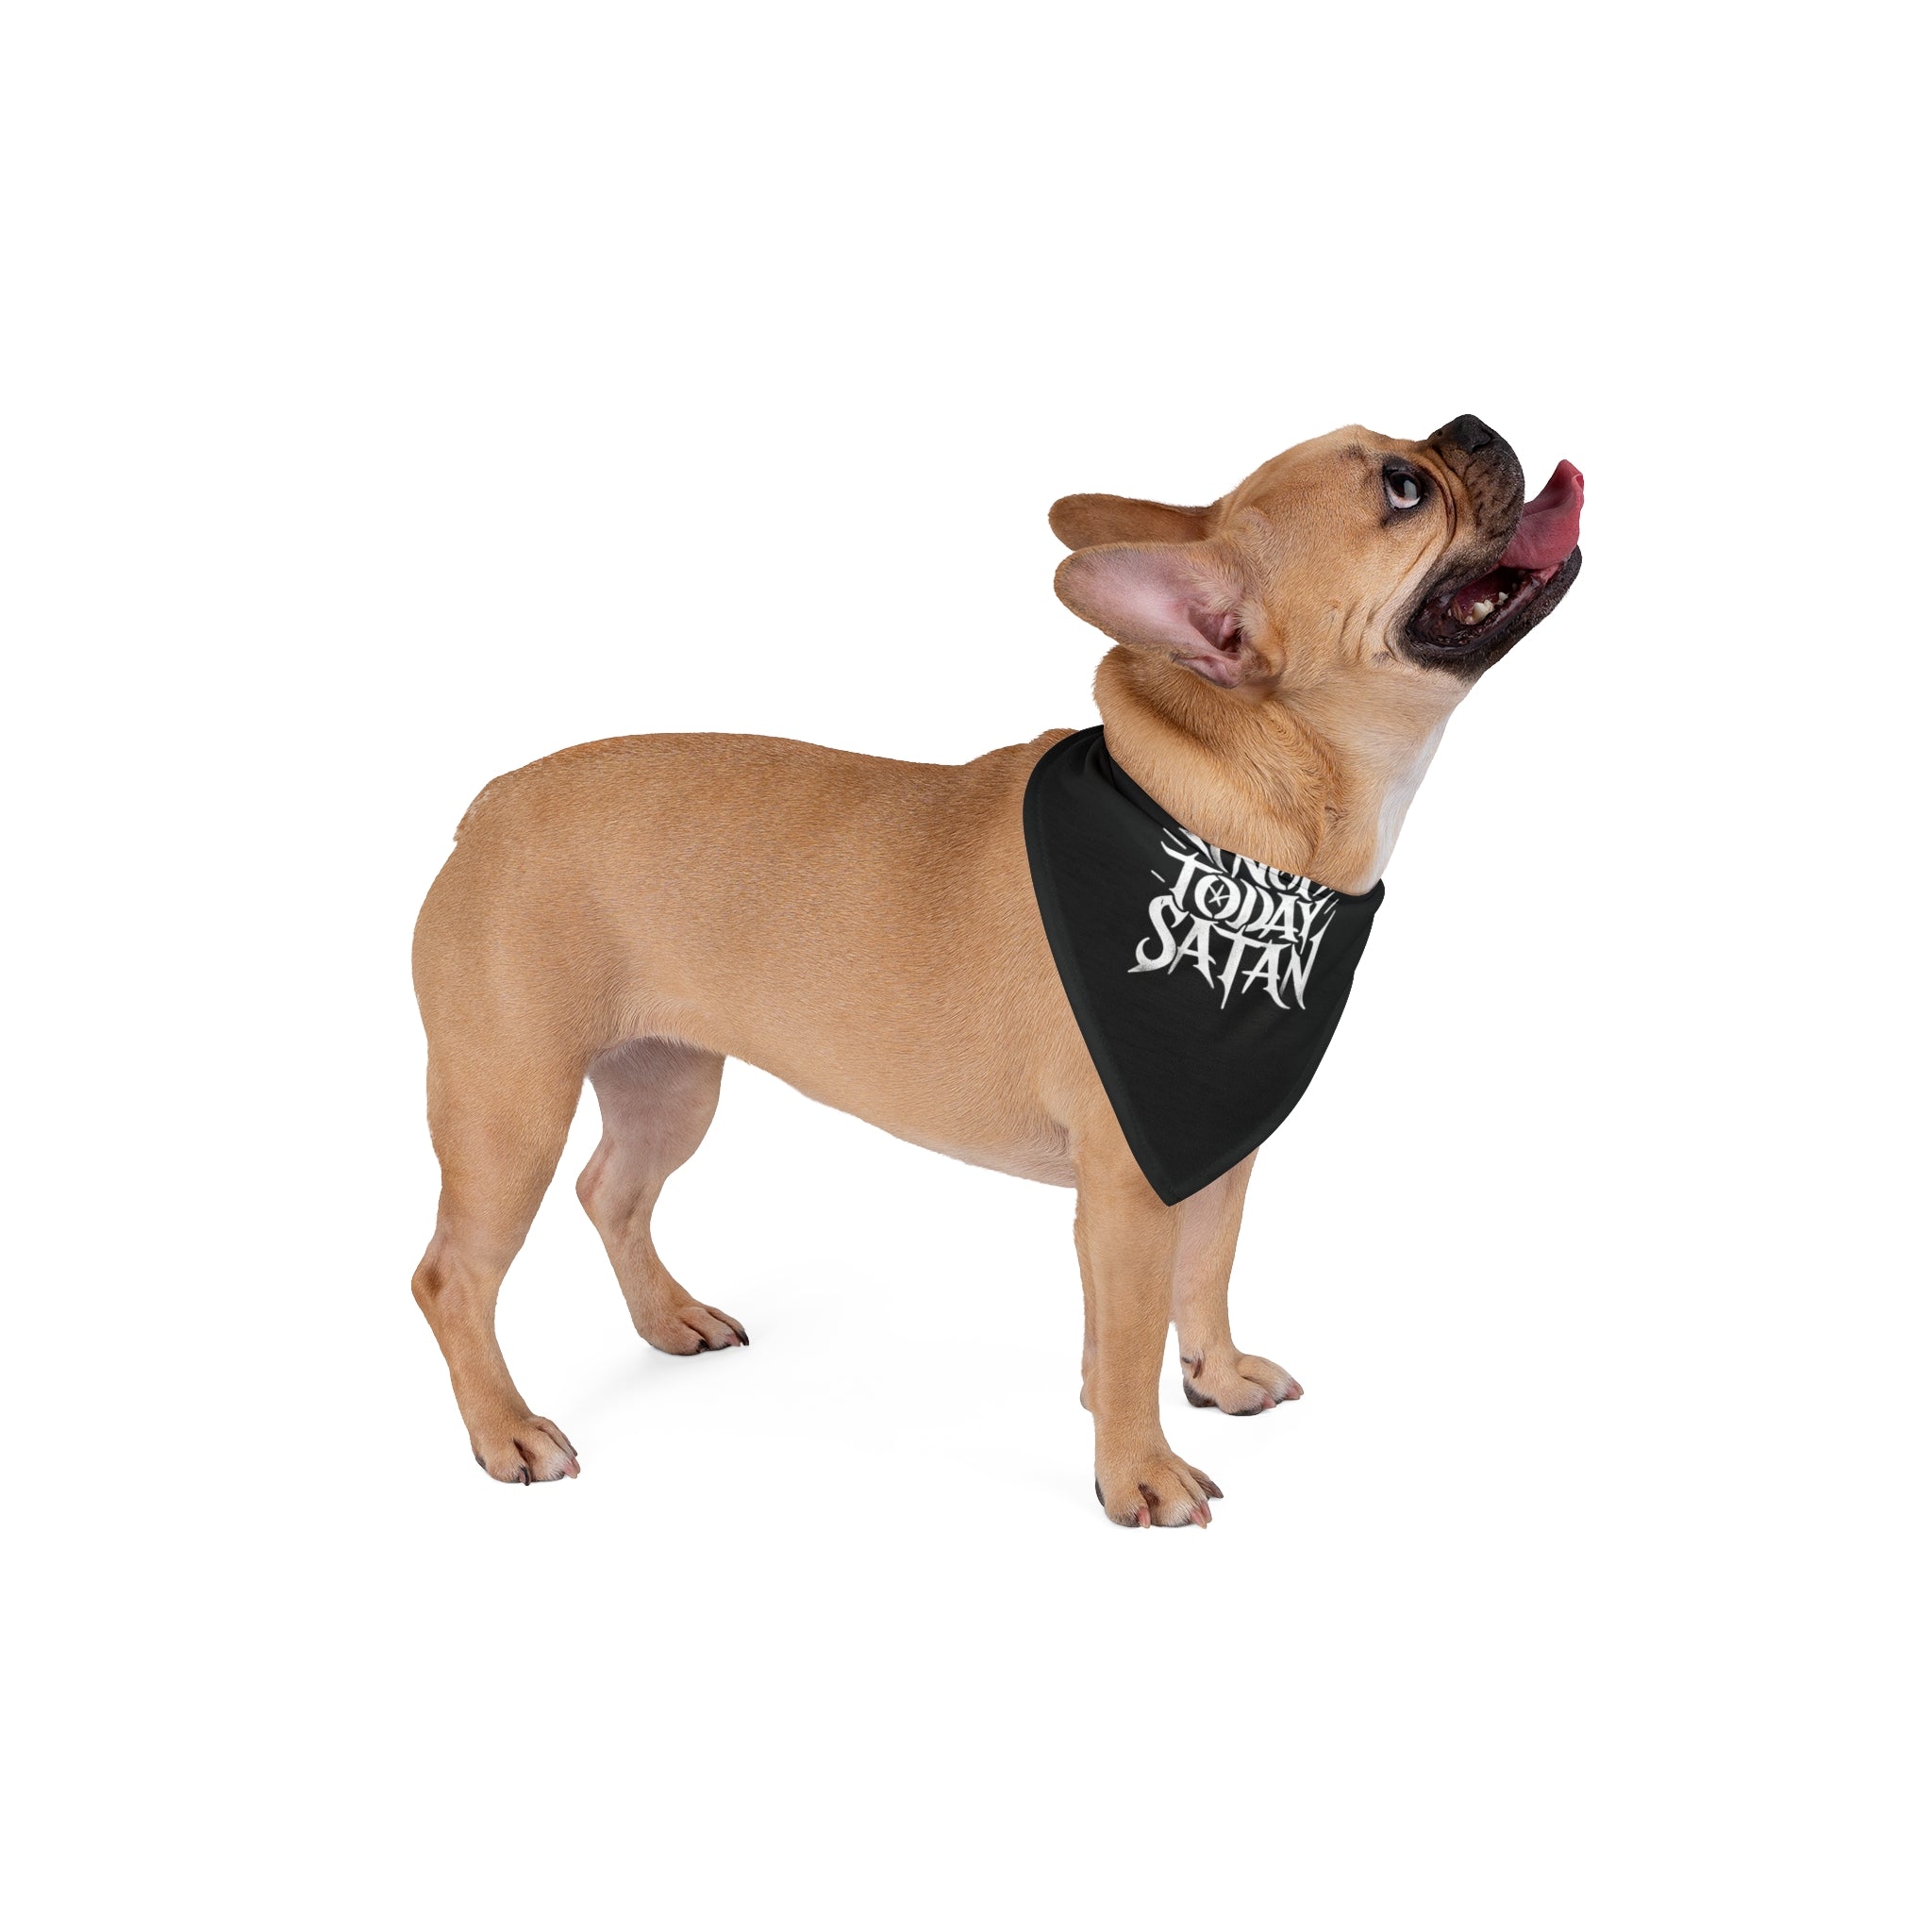 A tan French Bulldog sporting a "Not Today Satan - Pet Bandana" made of soft-spun polyester looks upward with its tongue out, embodying pet-friendly charm.